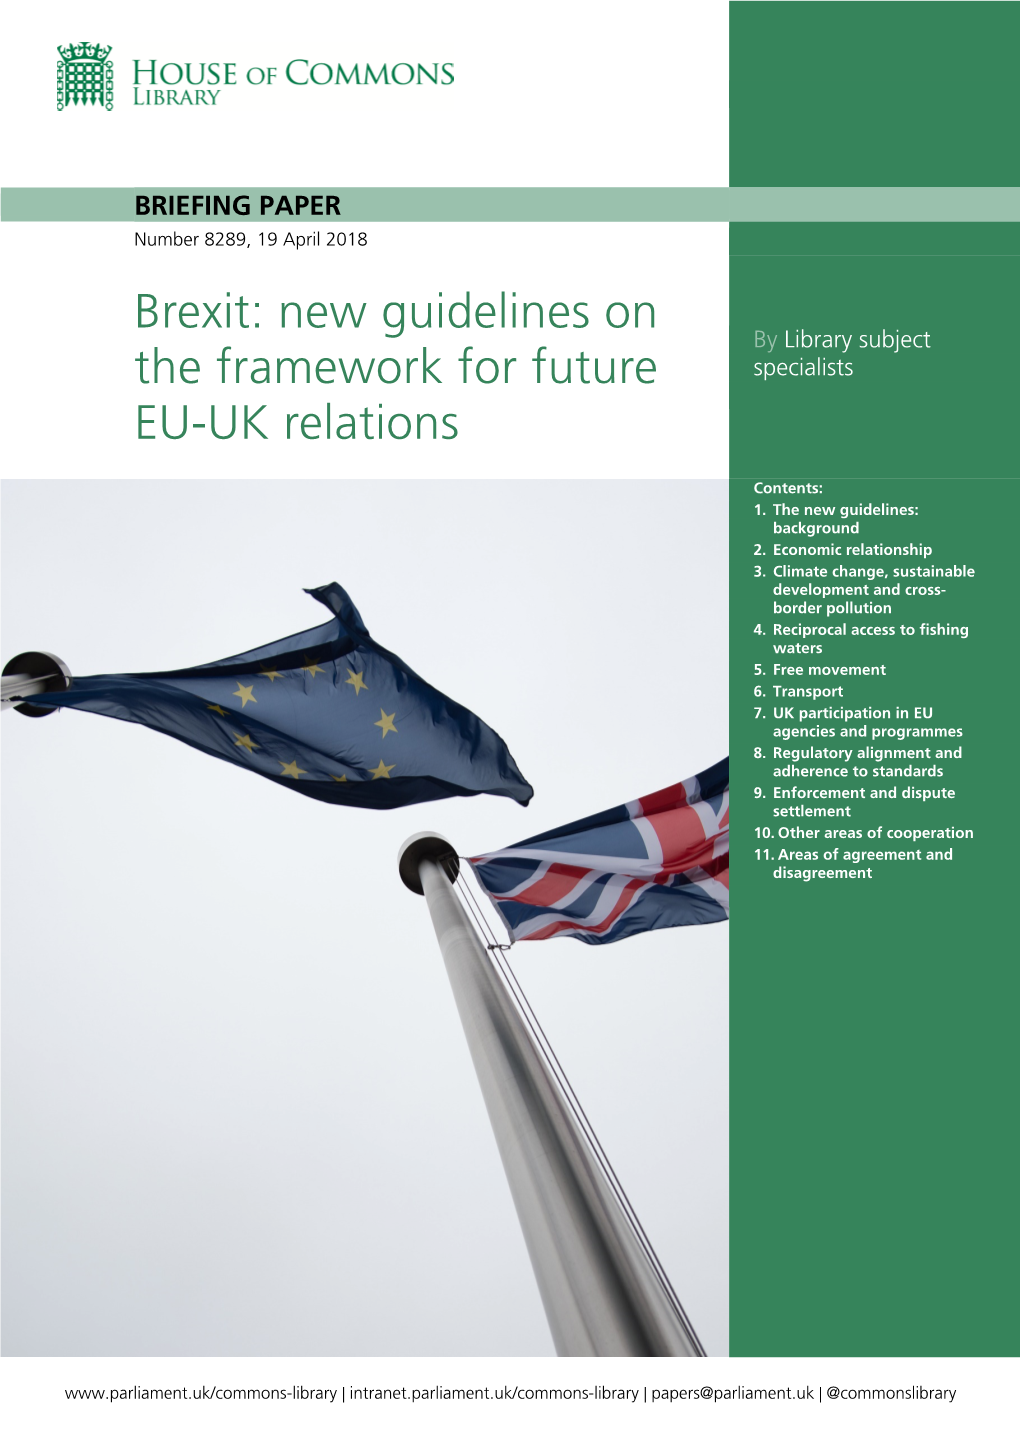 Brexit: New Guidelines on the Framework for Future EU-UK Relations